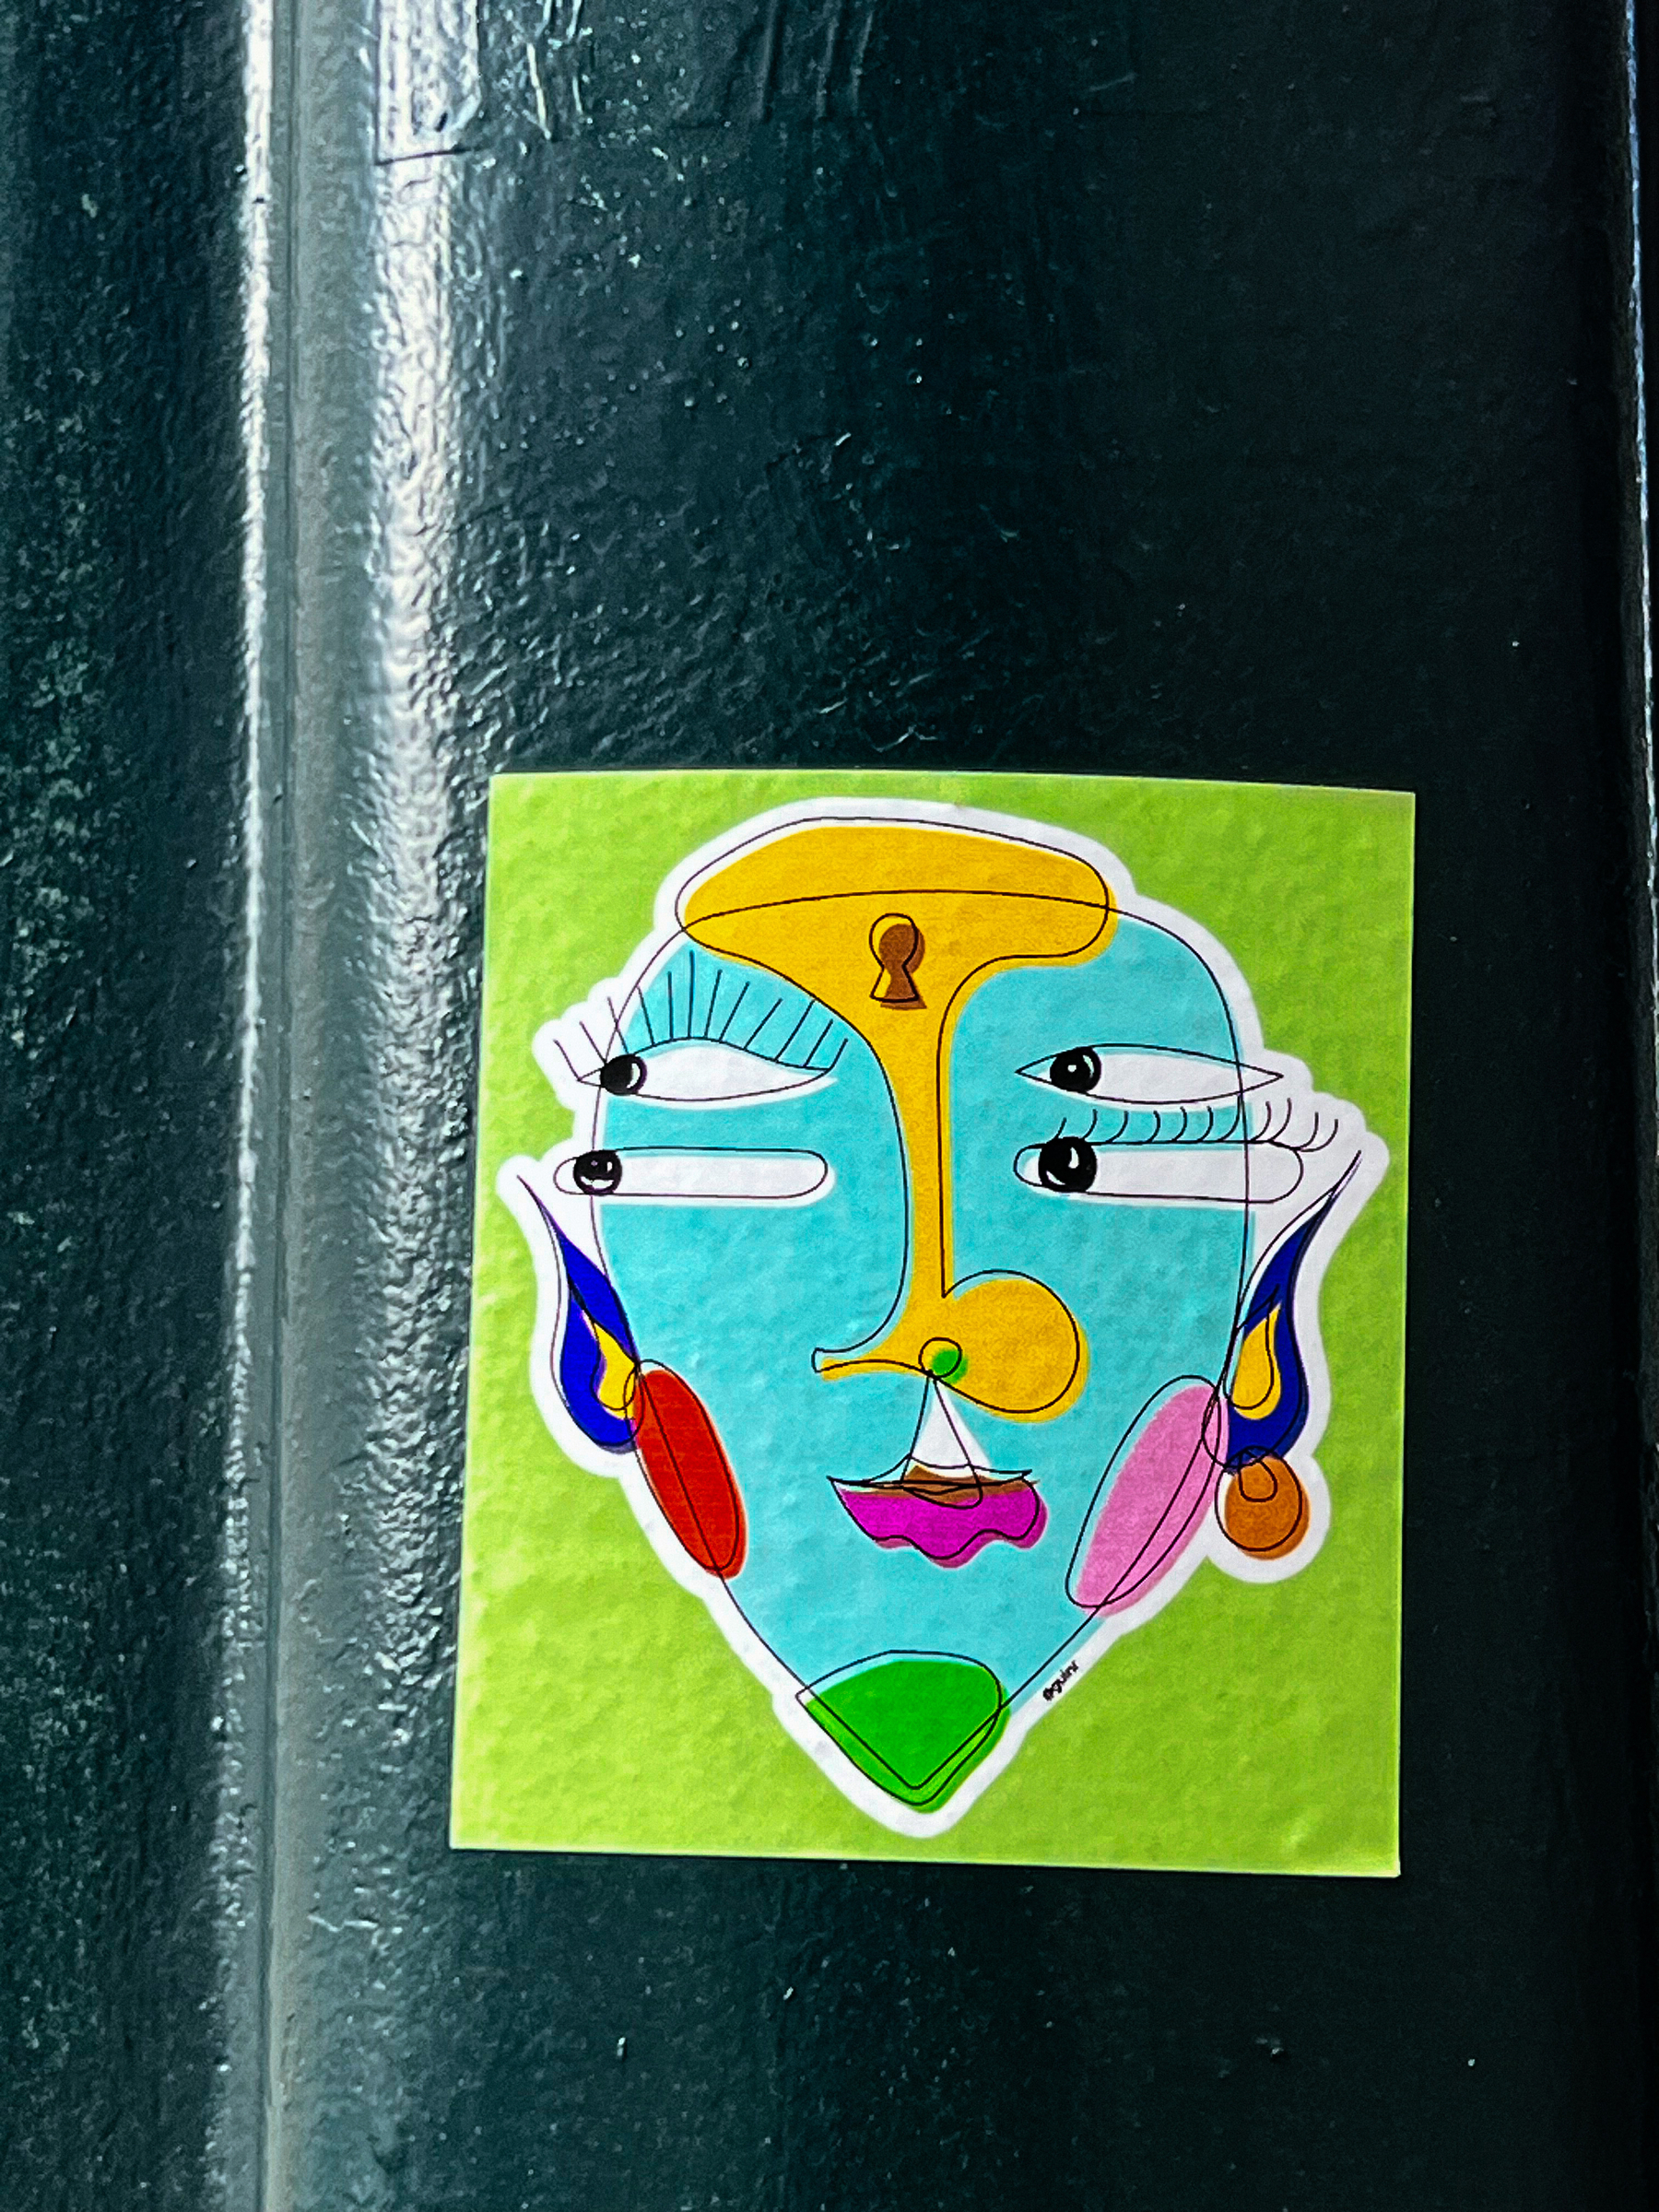 A very colorful sticker, depicting a face. It has four eyes. 